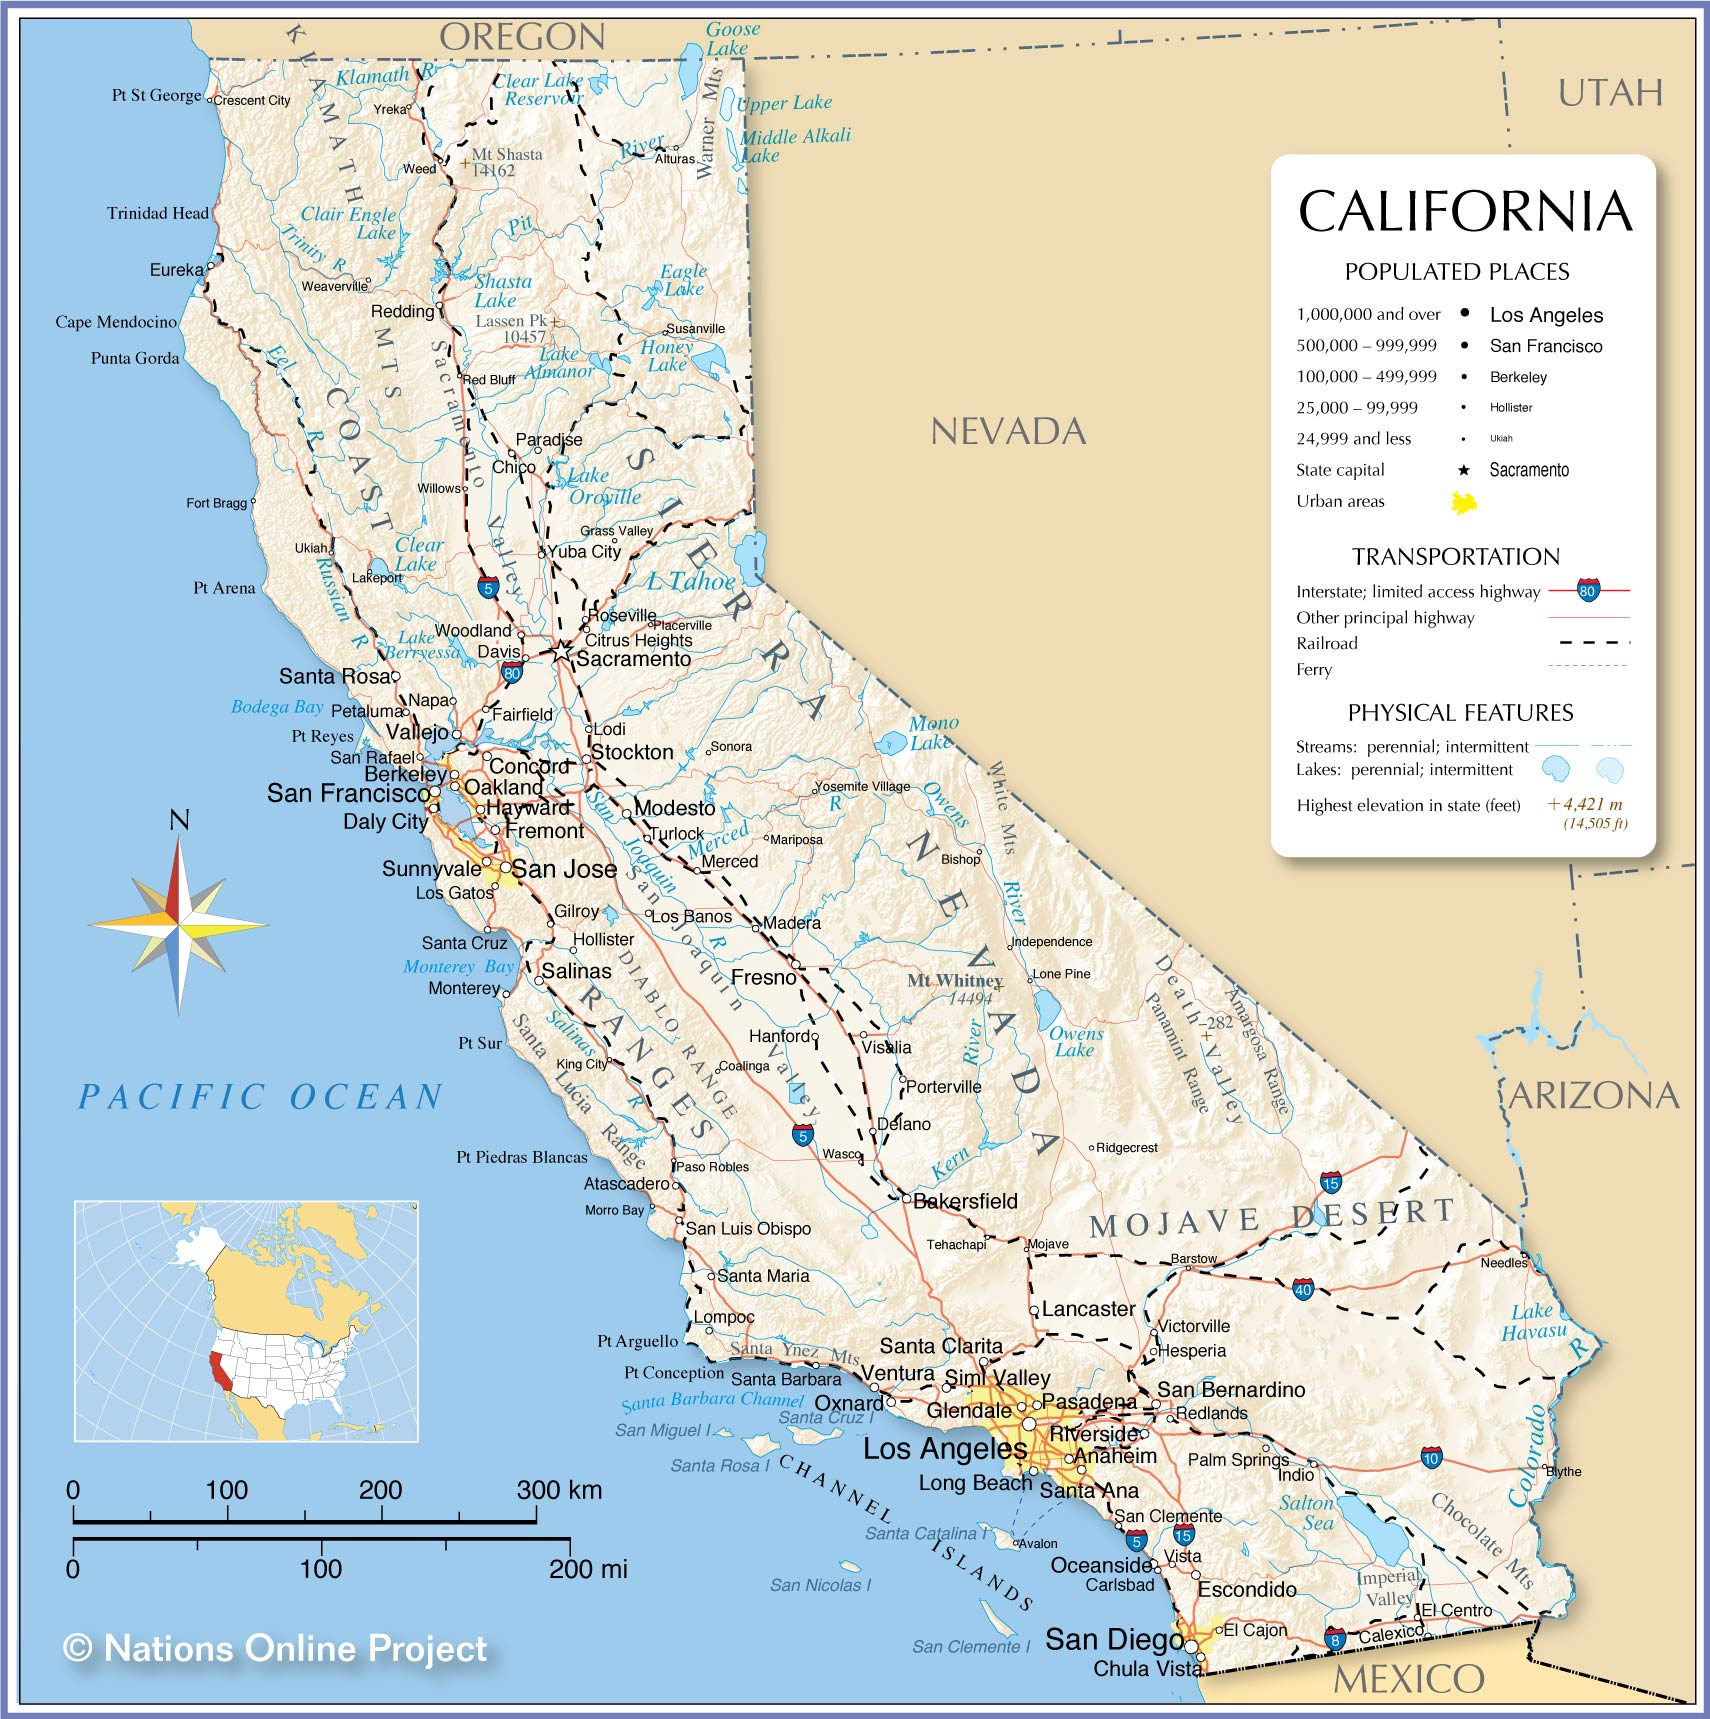 Reference Maps Of California, Usa - Nations Online Project - West Palm Beach California Map